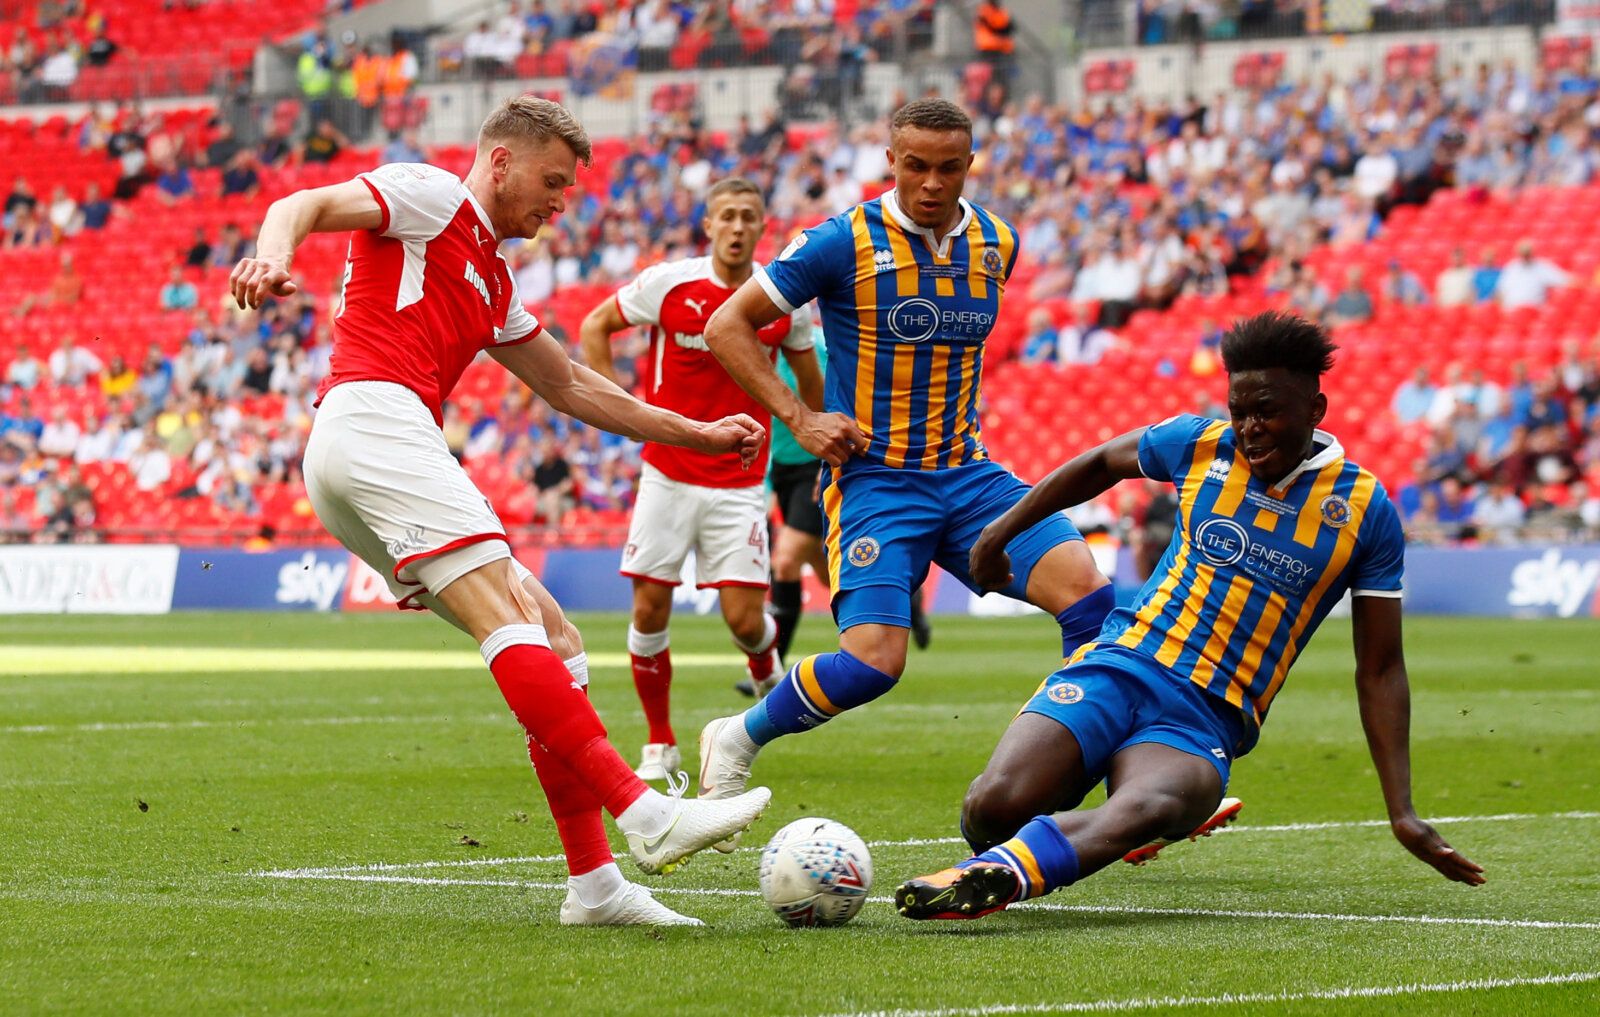 Soccer Football - League One Play-Off Final - Rotherham United v Shrewsbury Town - Wembley Stadium, London, Britain - May 27, 2018   Rotherham's Michael Smith in action with Shrewsbury Town's Aristote Nsiala   Action Images/Jason Cairnduff    EDITORIAL USE ONLY. No use with unauthorized audio, video, data, fixture lists, club/league logos or 